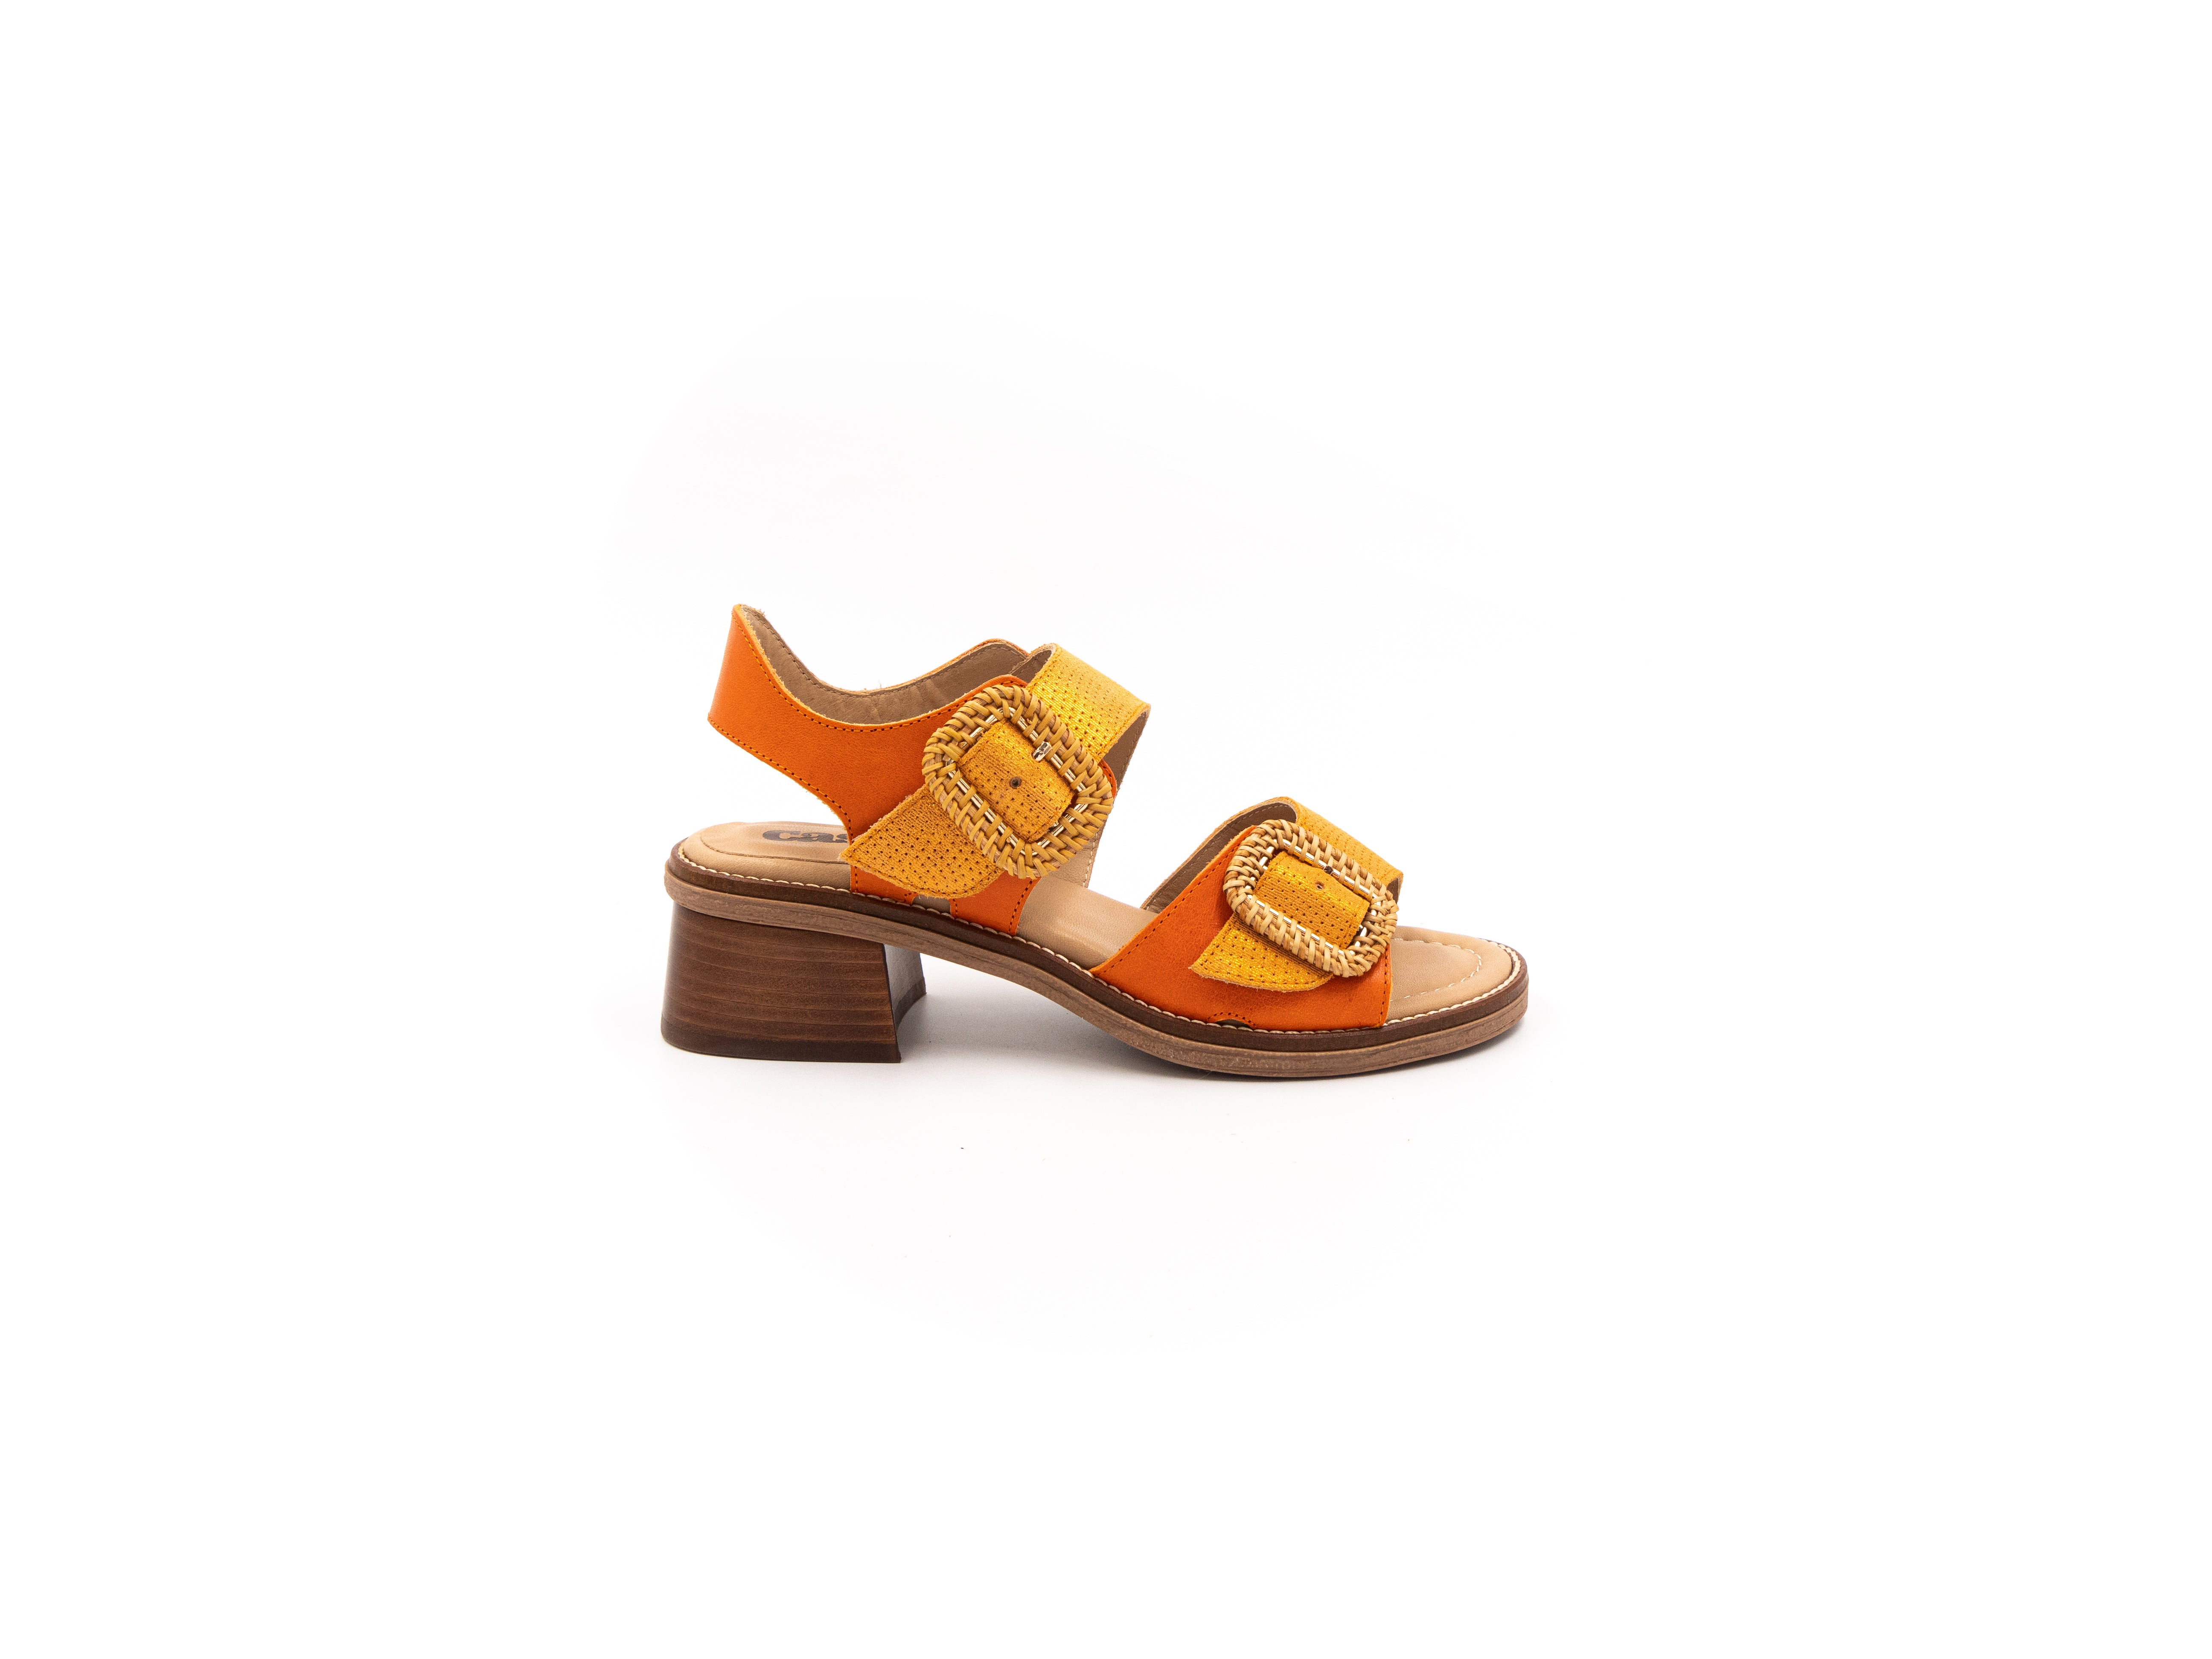 Sandals with small heels in shades of orange.